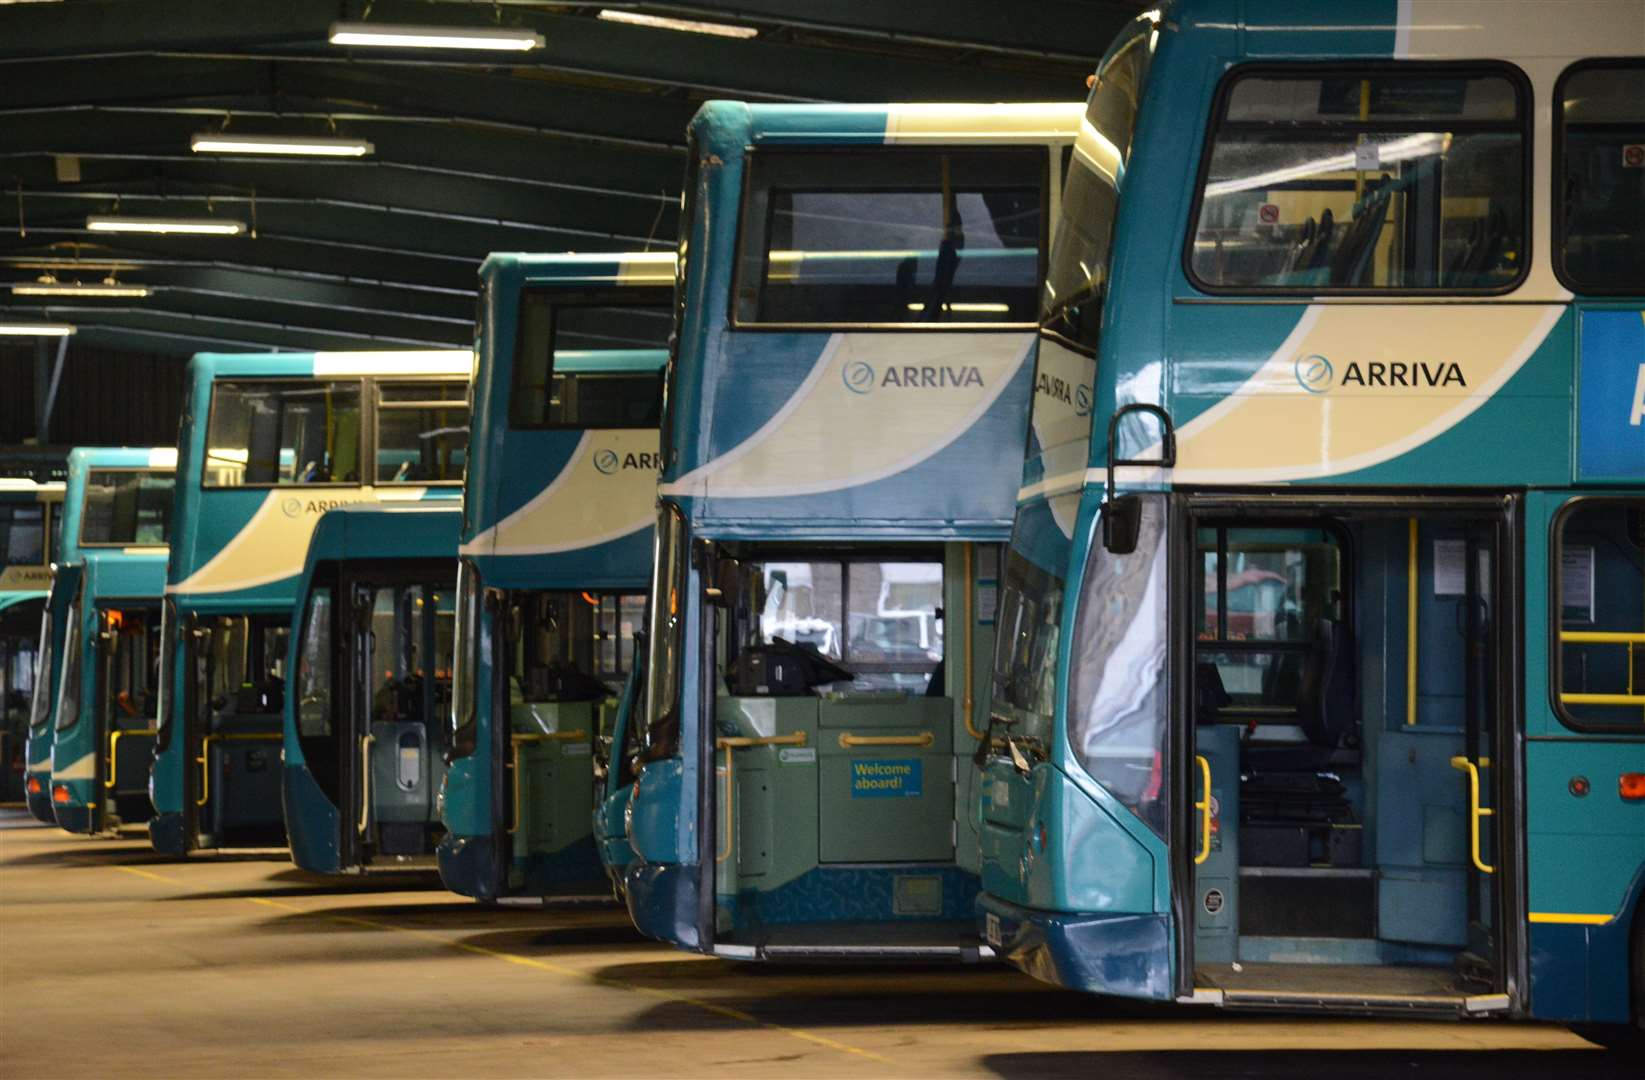 Arriva say an internal investigation is underway